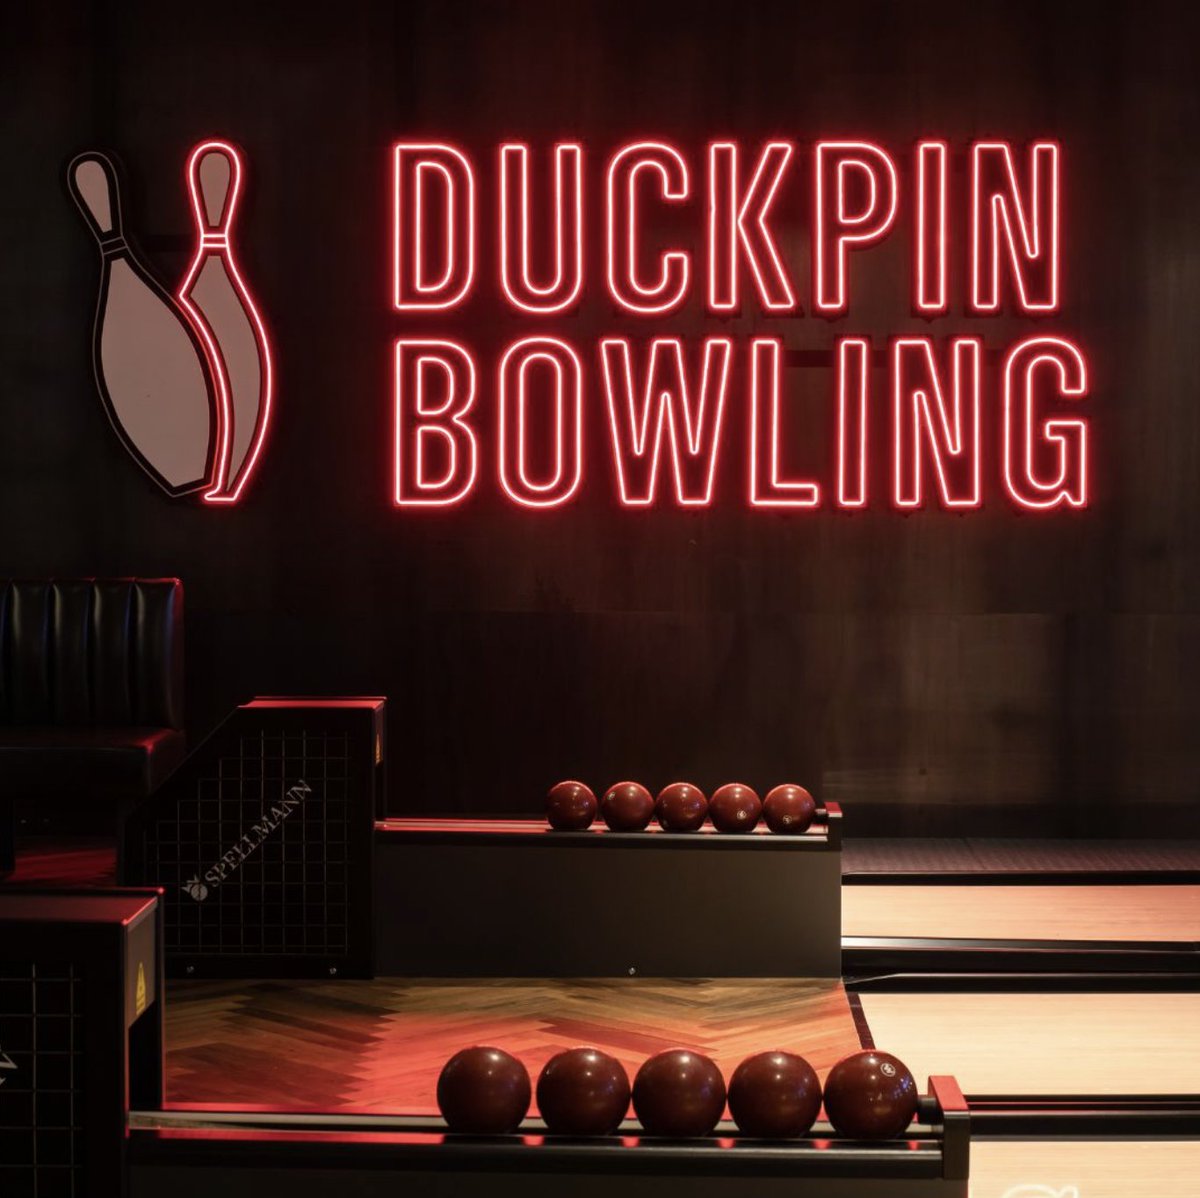 PINS🎳 PINTS🍻 PIZZAS🍕 End the weekend right with @BrewDogWaterloo A game of bowling, pizza and a pint just £20 per person! Available on Sundays and Mondays only ✔️ Book now 👉 brewdog.com/uk/brewdog-wat…